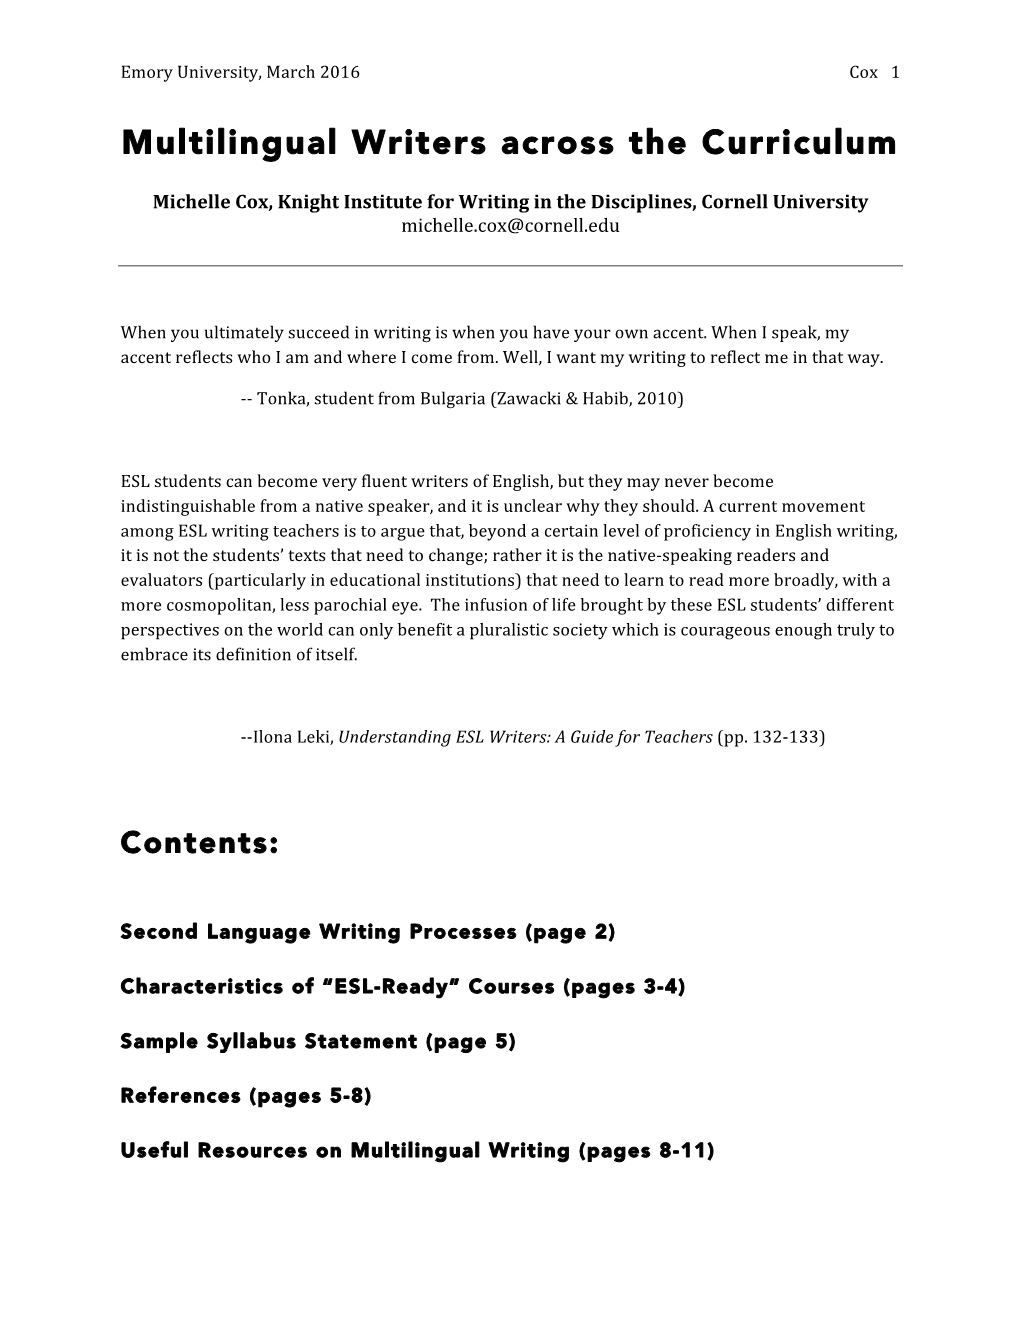 Multilingual Writers Across the Curriculum